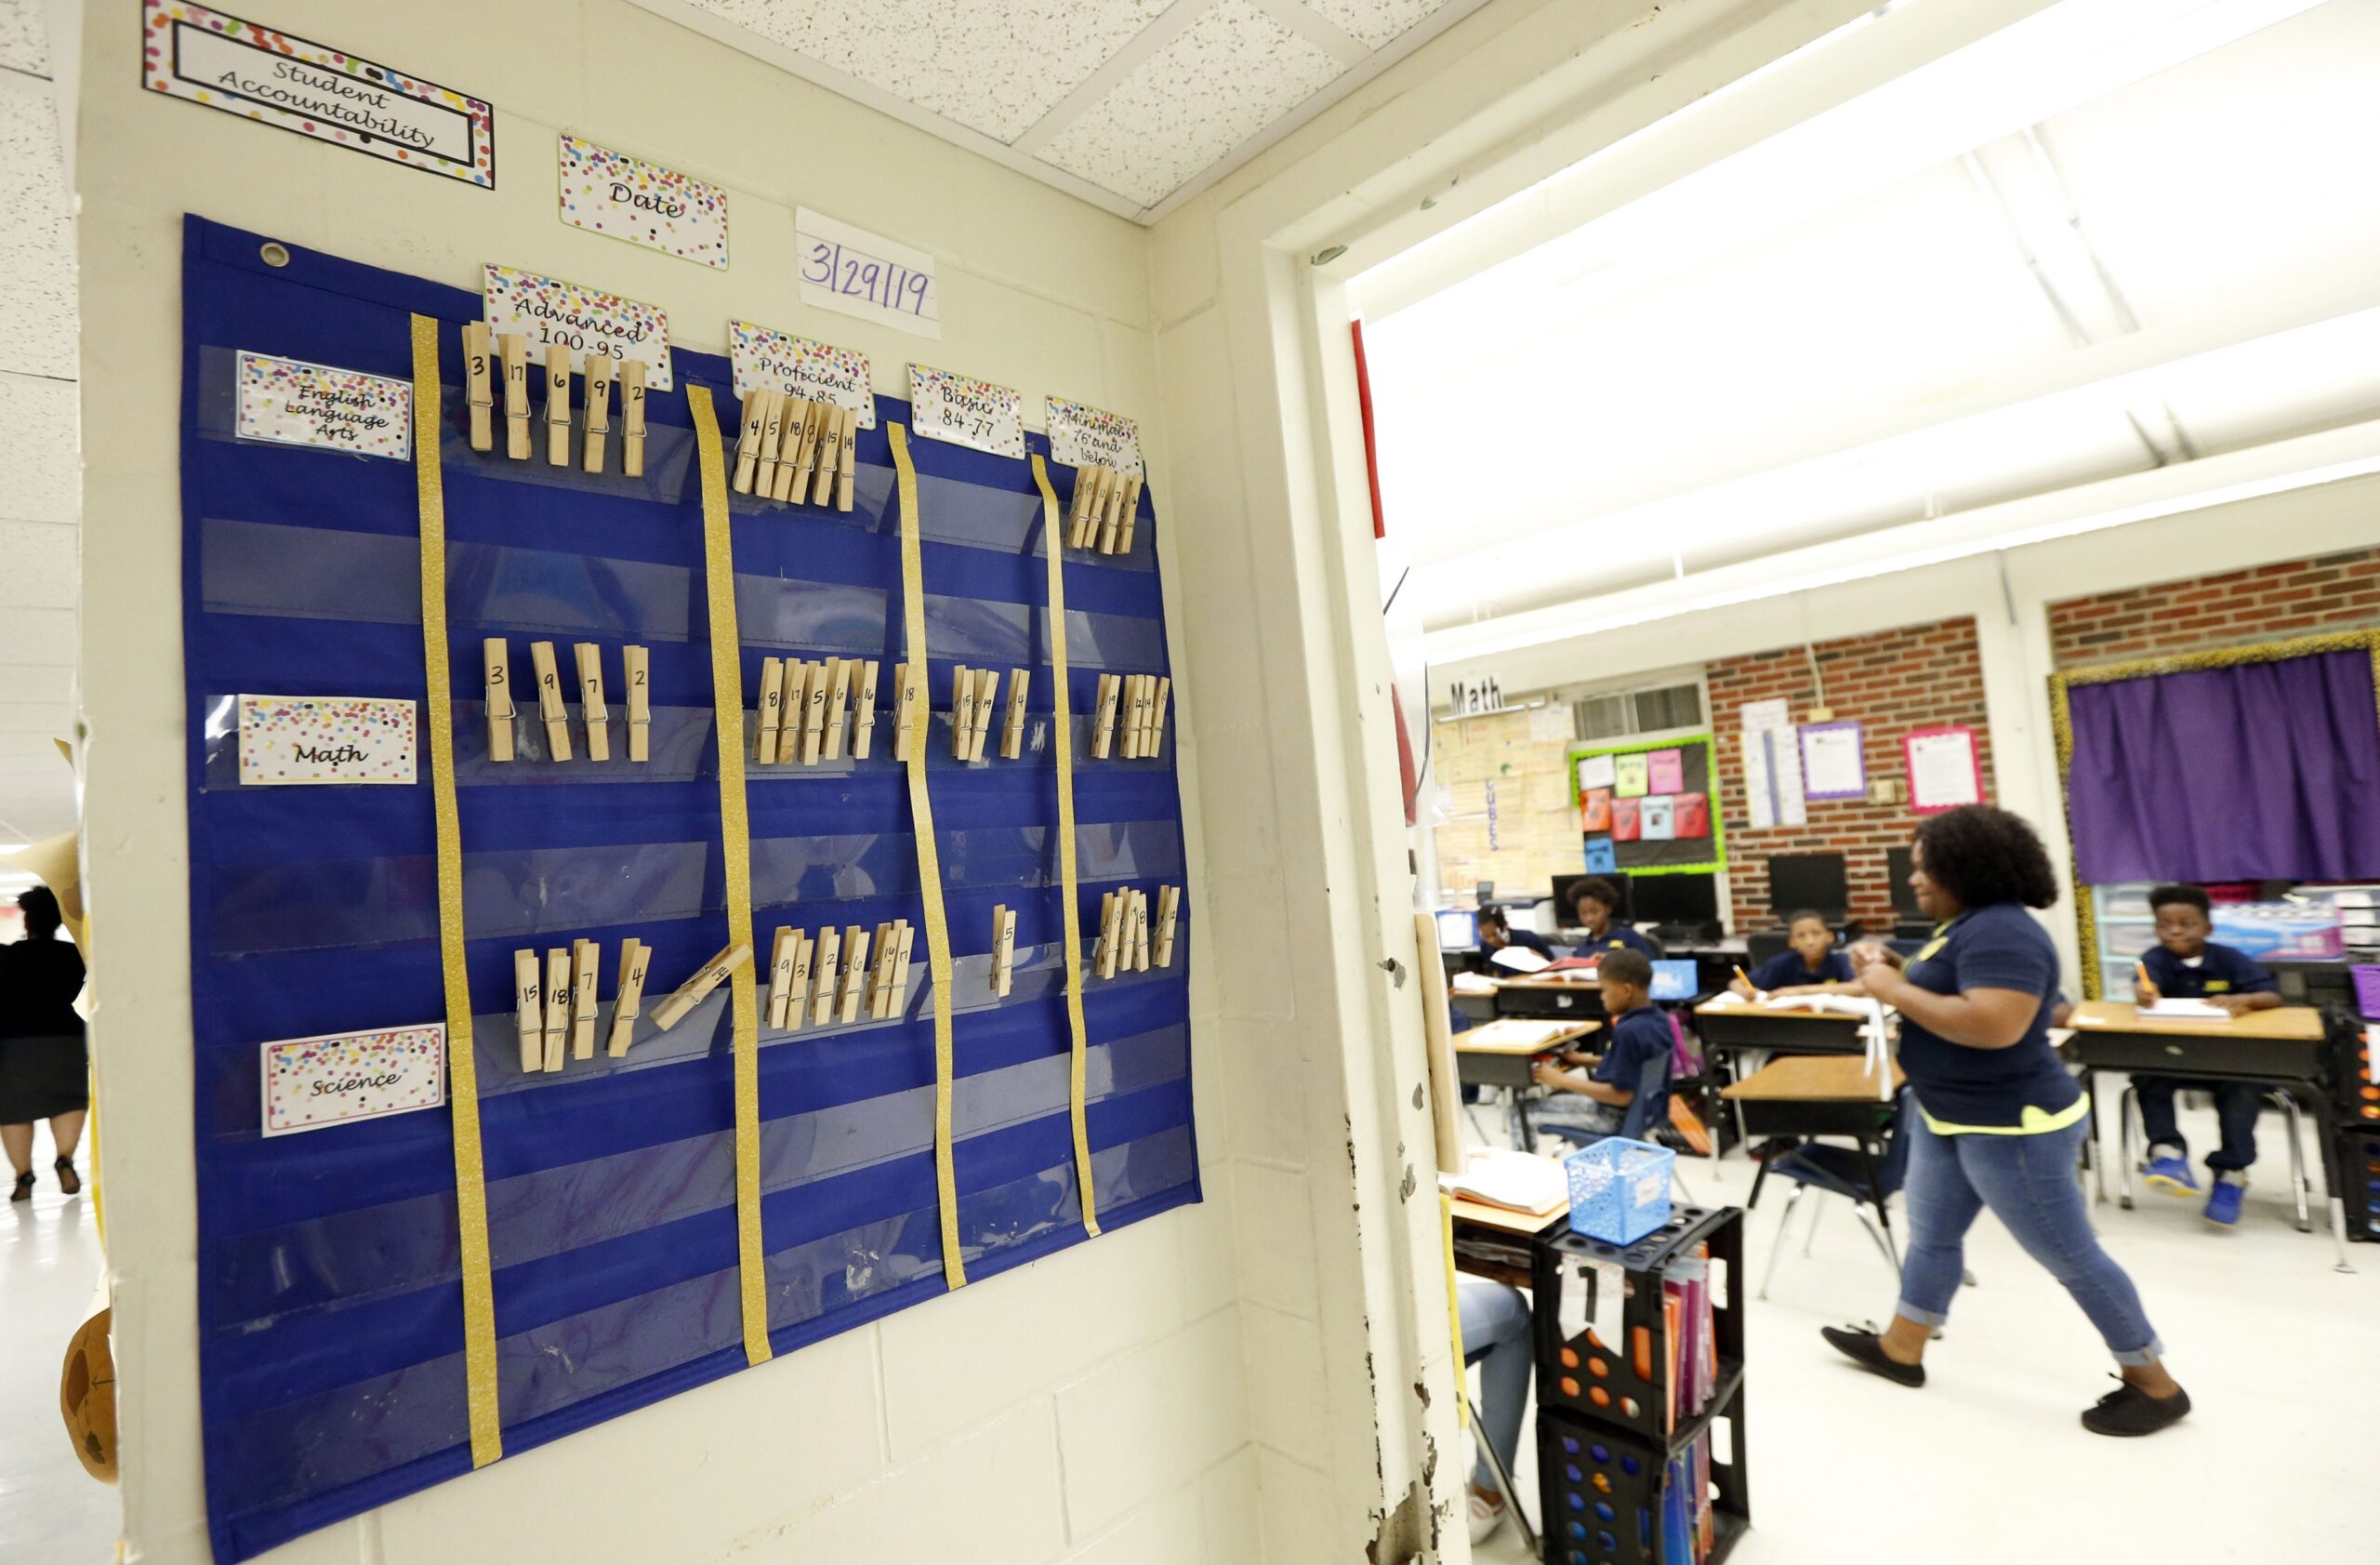 Staffing cuts in Fort Atkinson illustrate Wisconsin school districts’ dependence on referendums